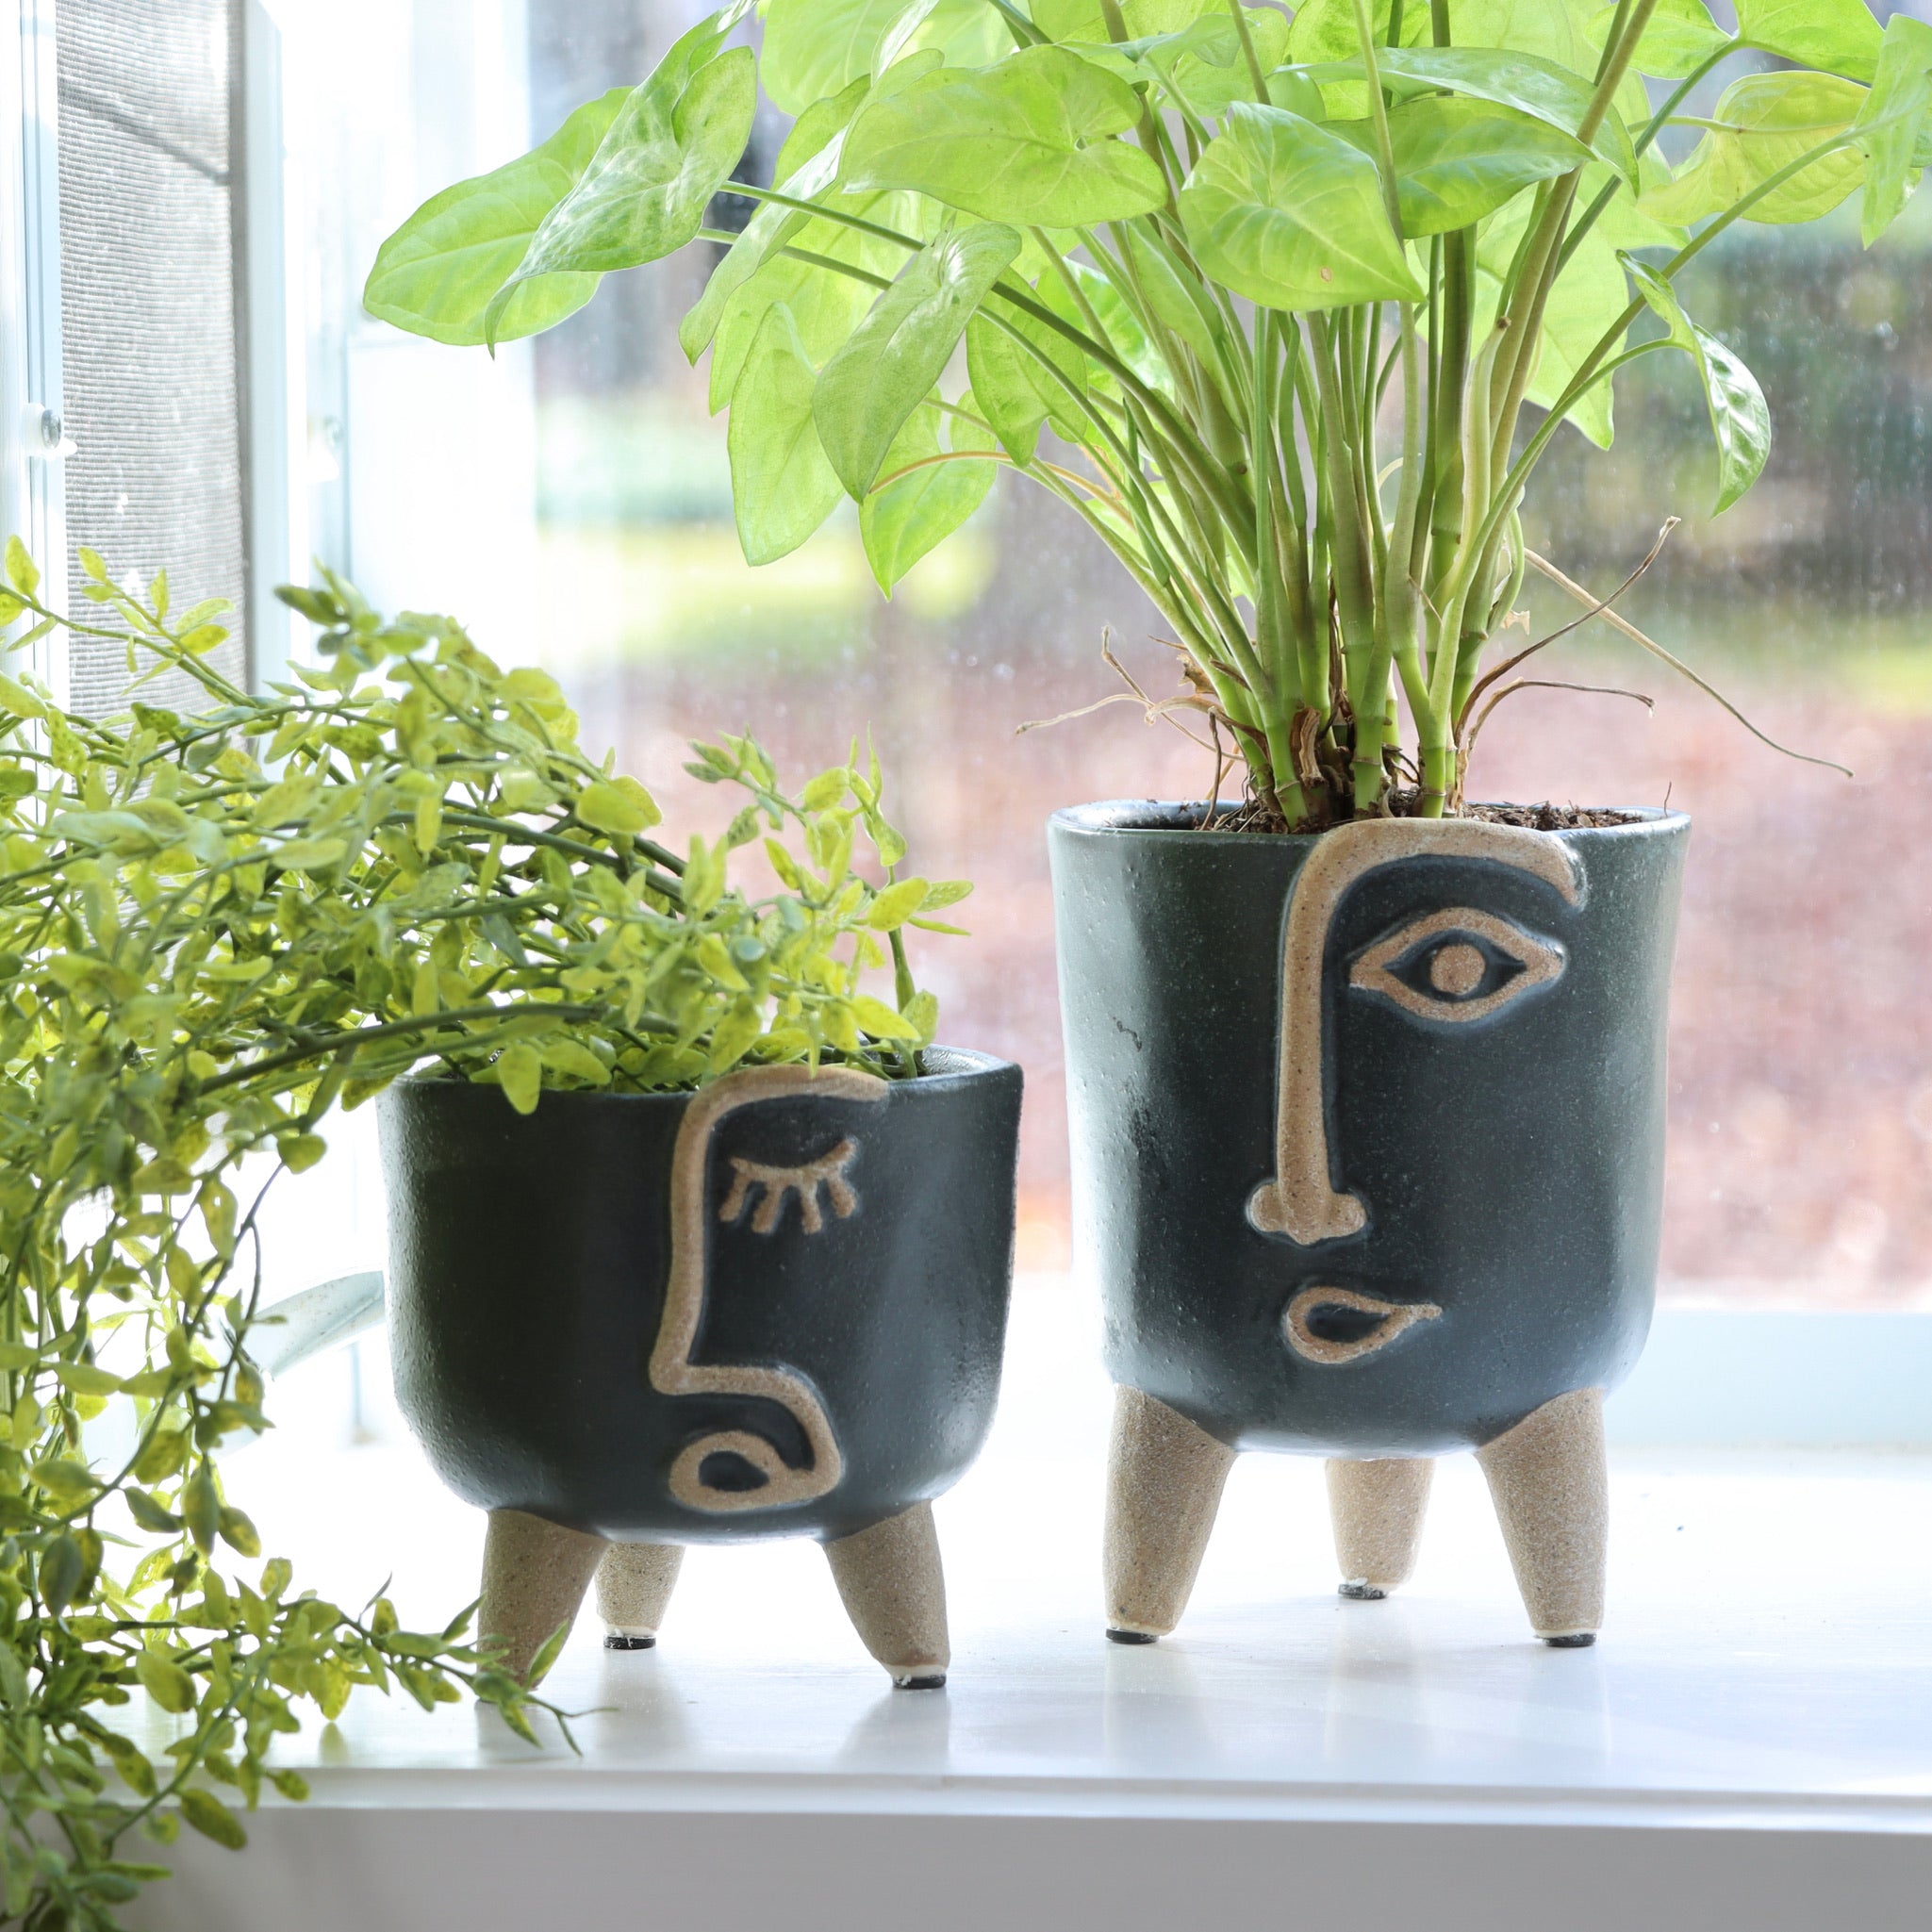 Abstract Faces Ornaments & Planters